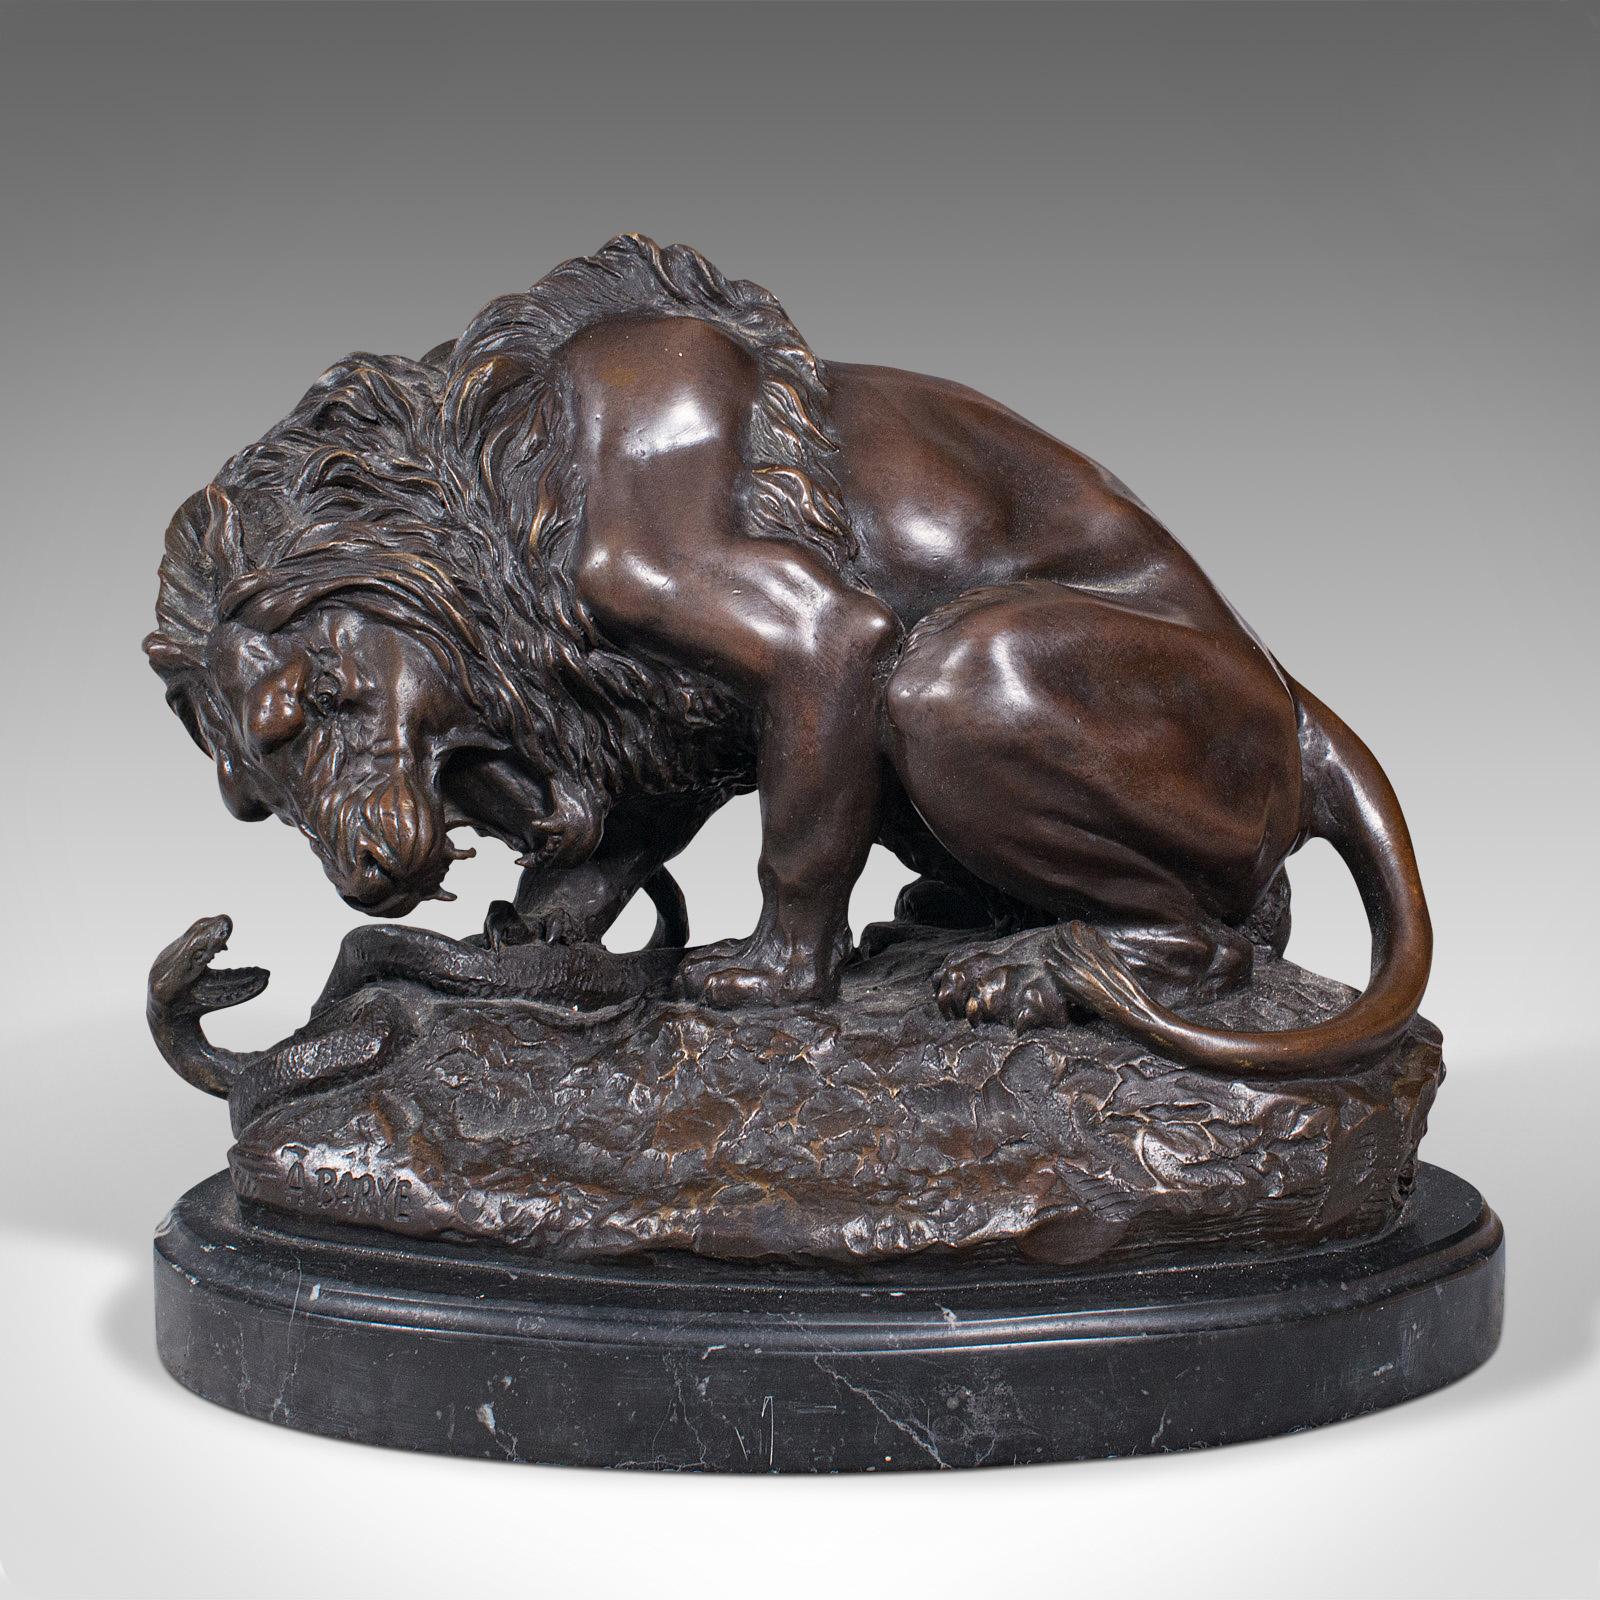 This is a vintage art bronze. A French, fine cast sculpture of a lion and serpent, after Antoine-Louis Barye, dating to the mid 20th century, circa 1950.

In the manner of one of the early 19th century's foremost animalier - or animal sculptor -